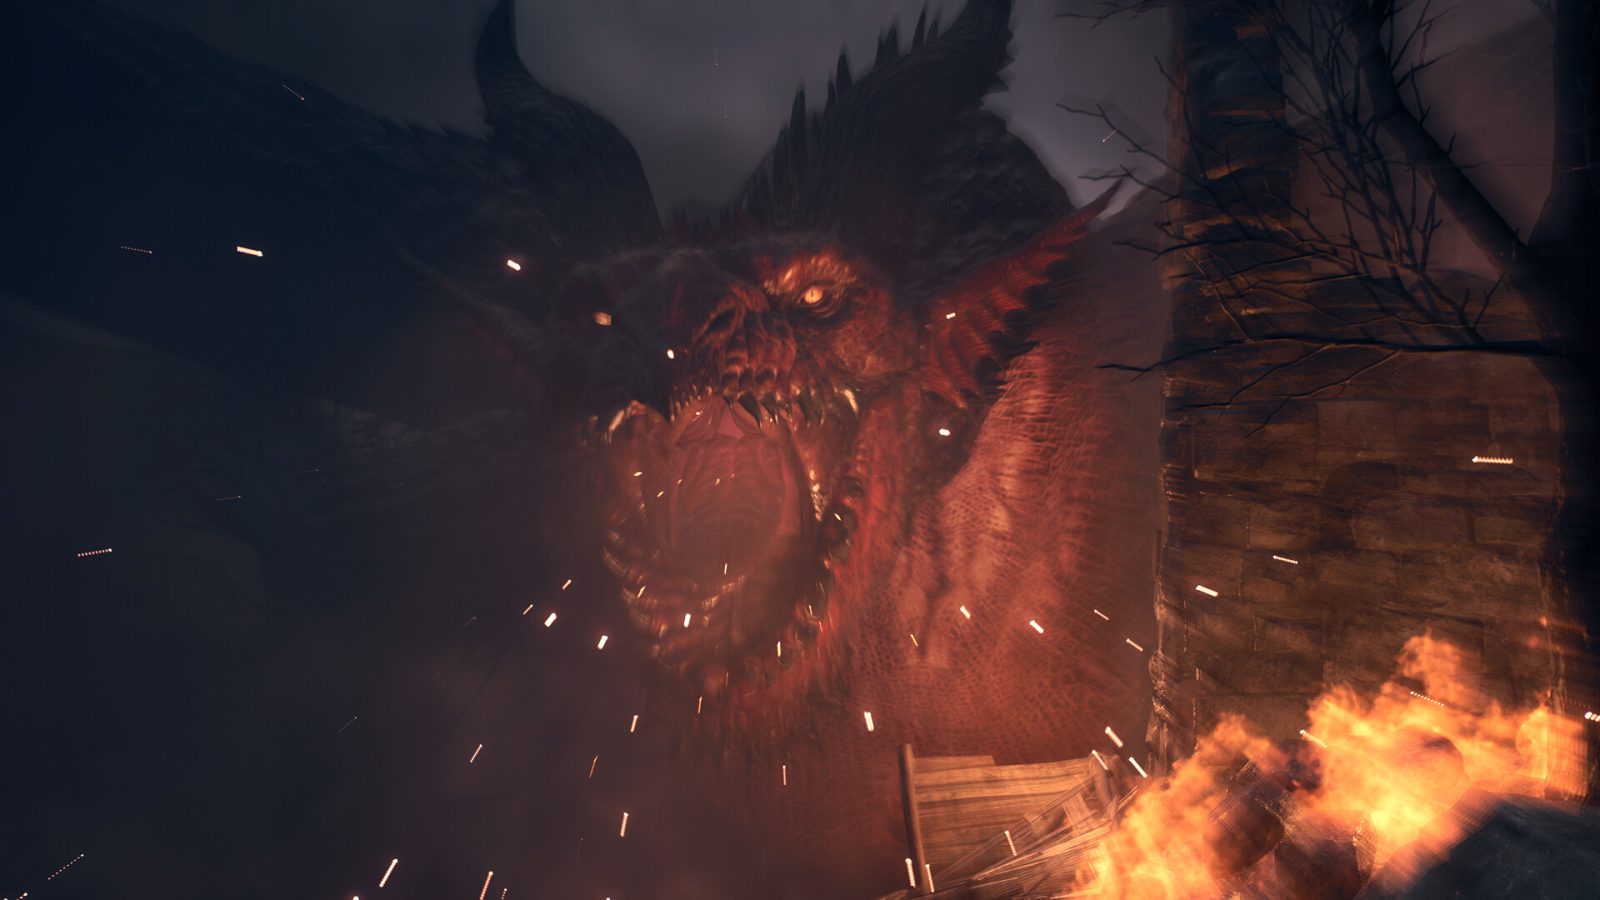 Why Dragon's Dogma 2 Is Worth Getting Excited About - GameSpot